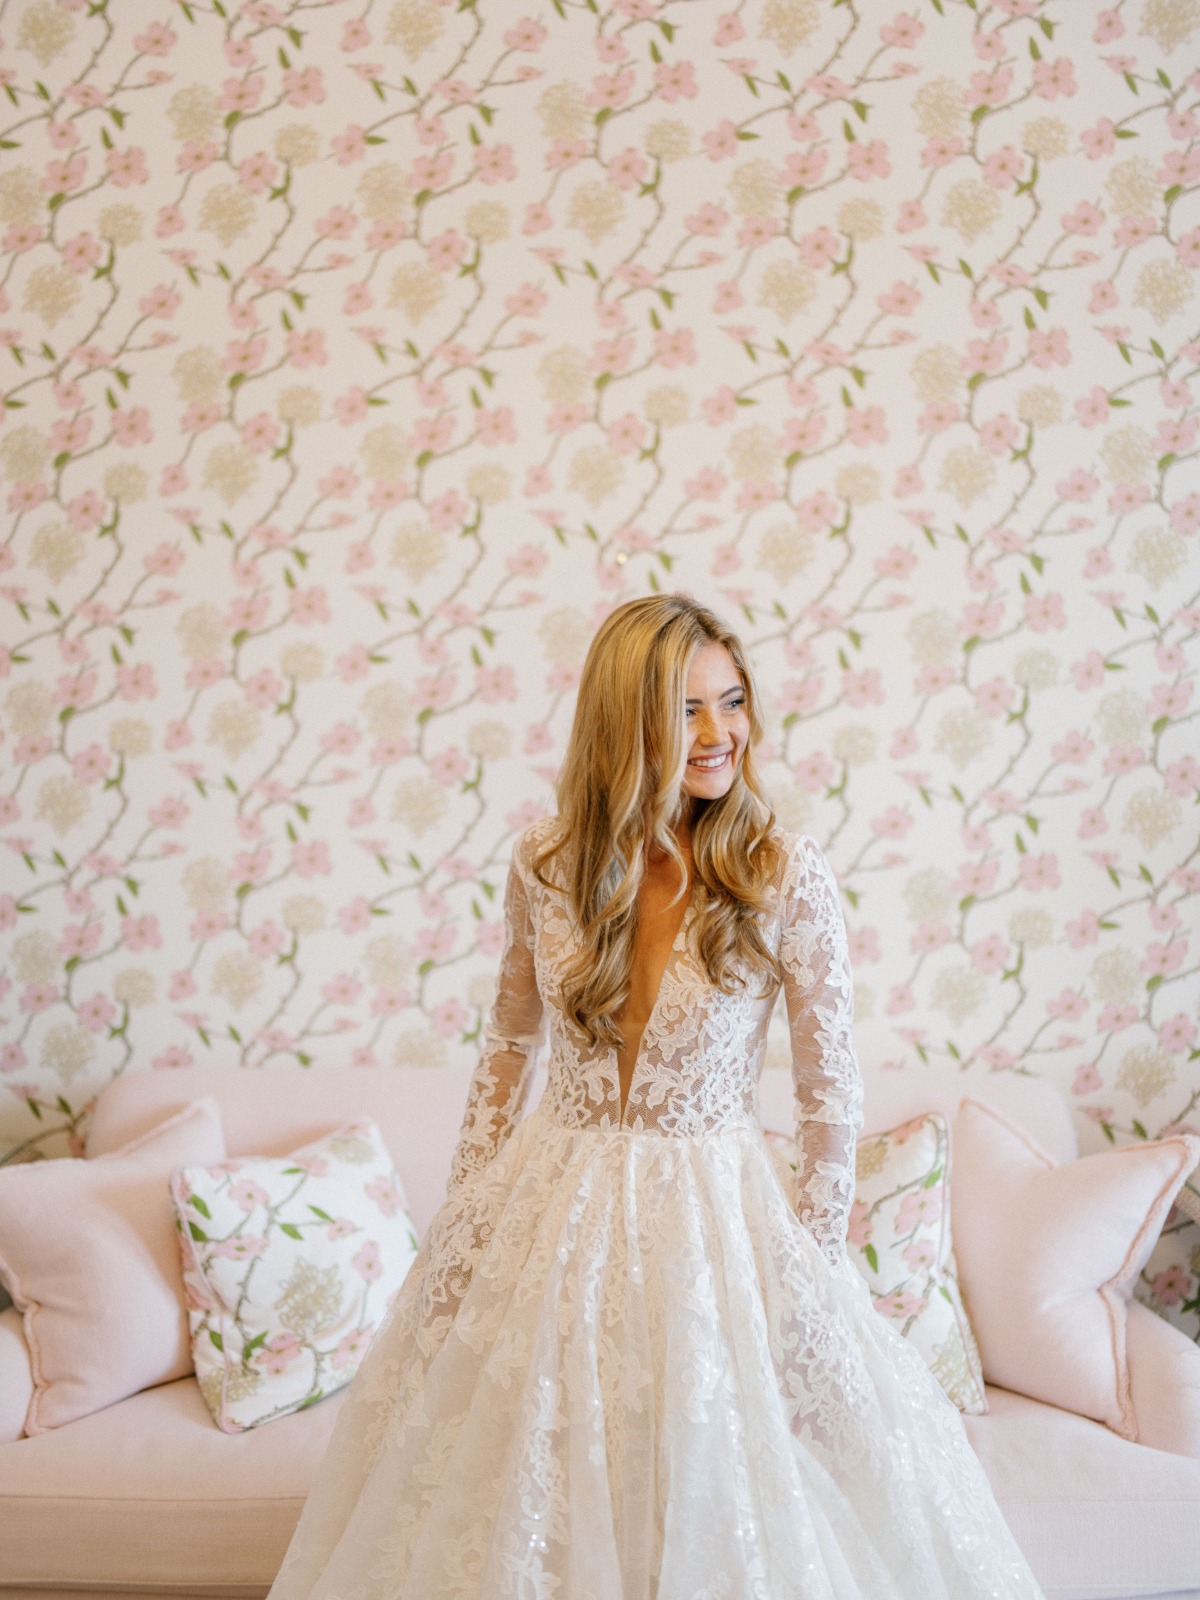 Portrait of bride in wedding dress in front of sofa and printed wallpaper